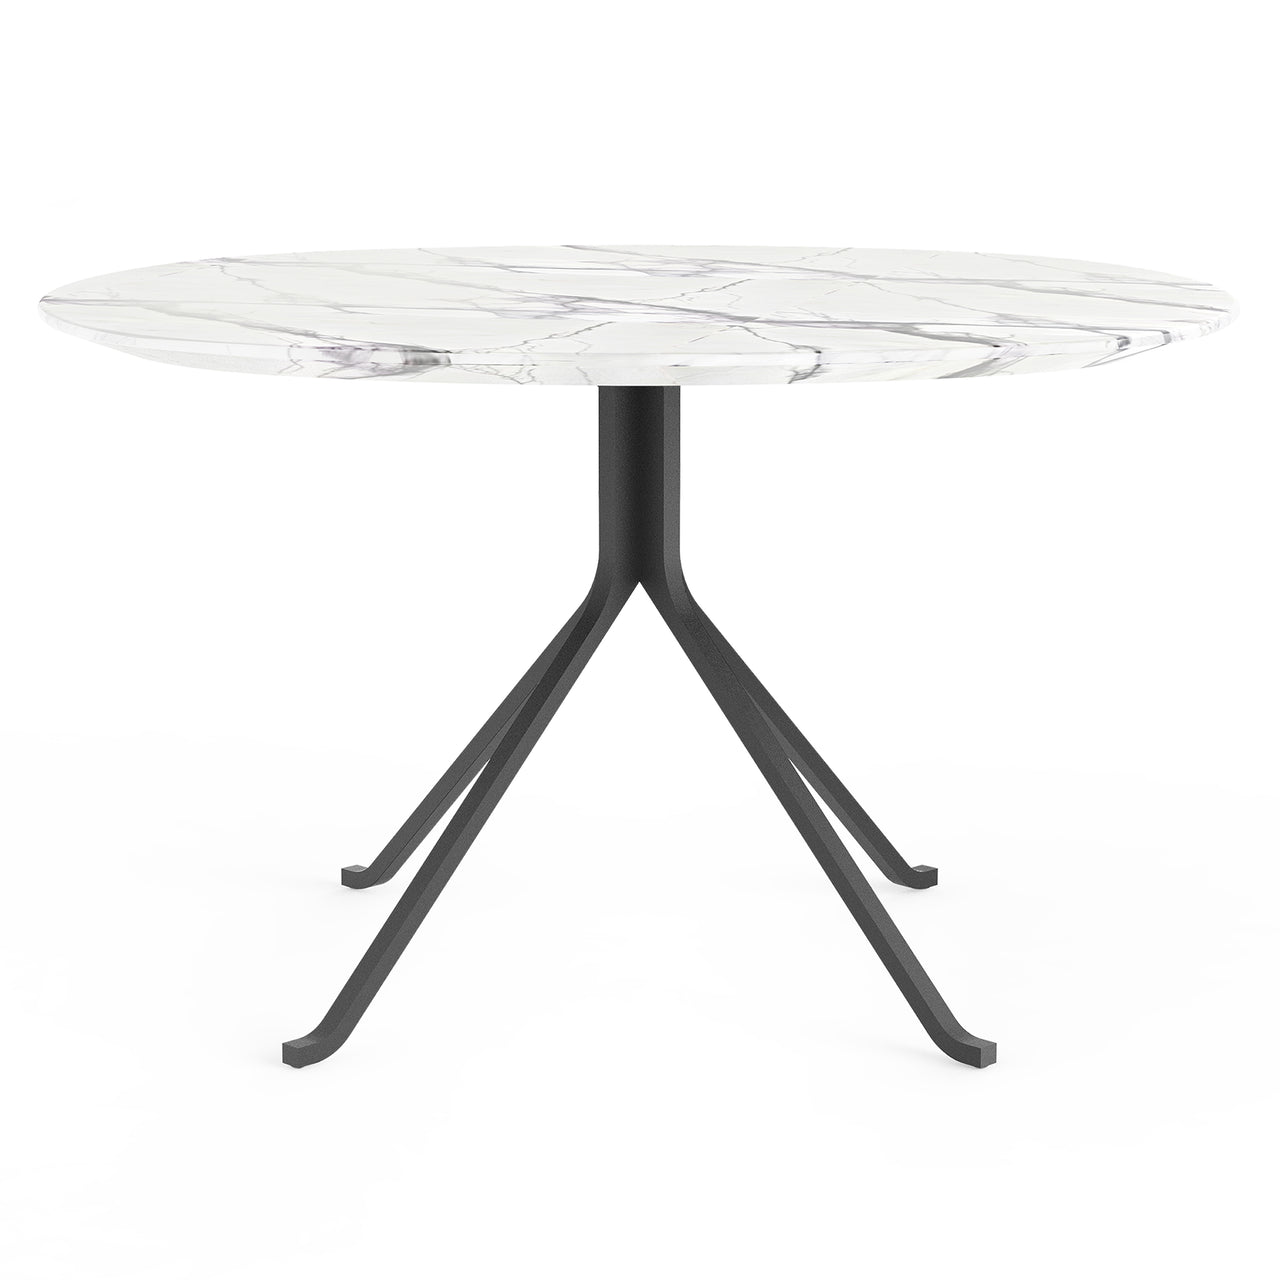 Blink Dining Table: Stone Top + Volakos